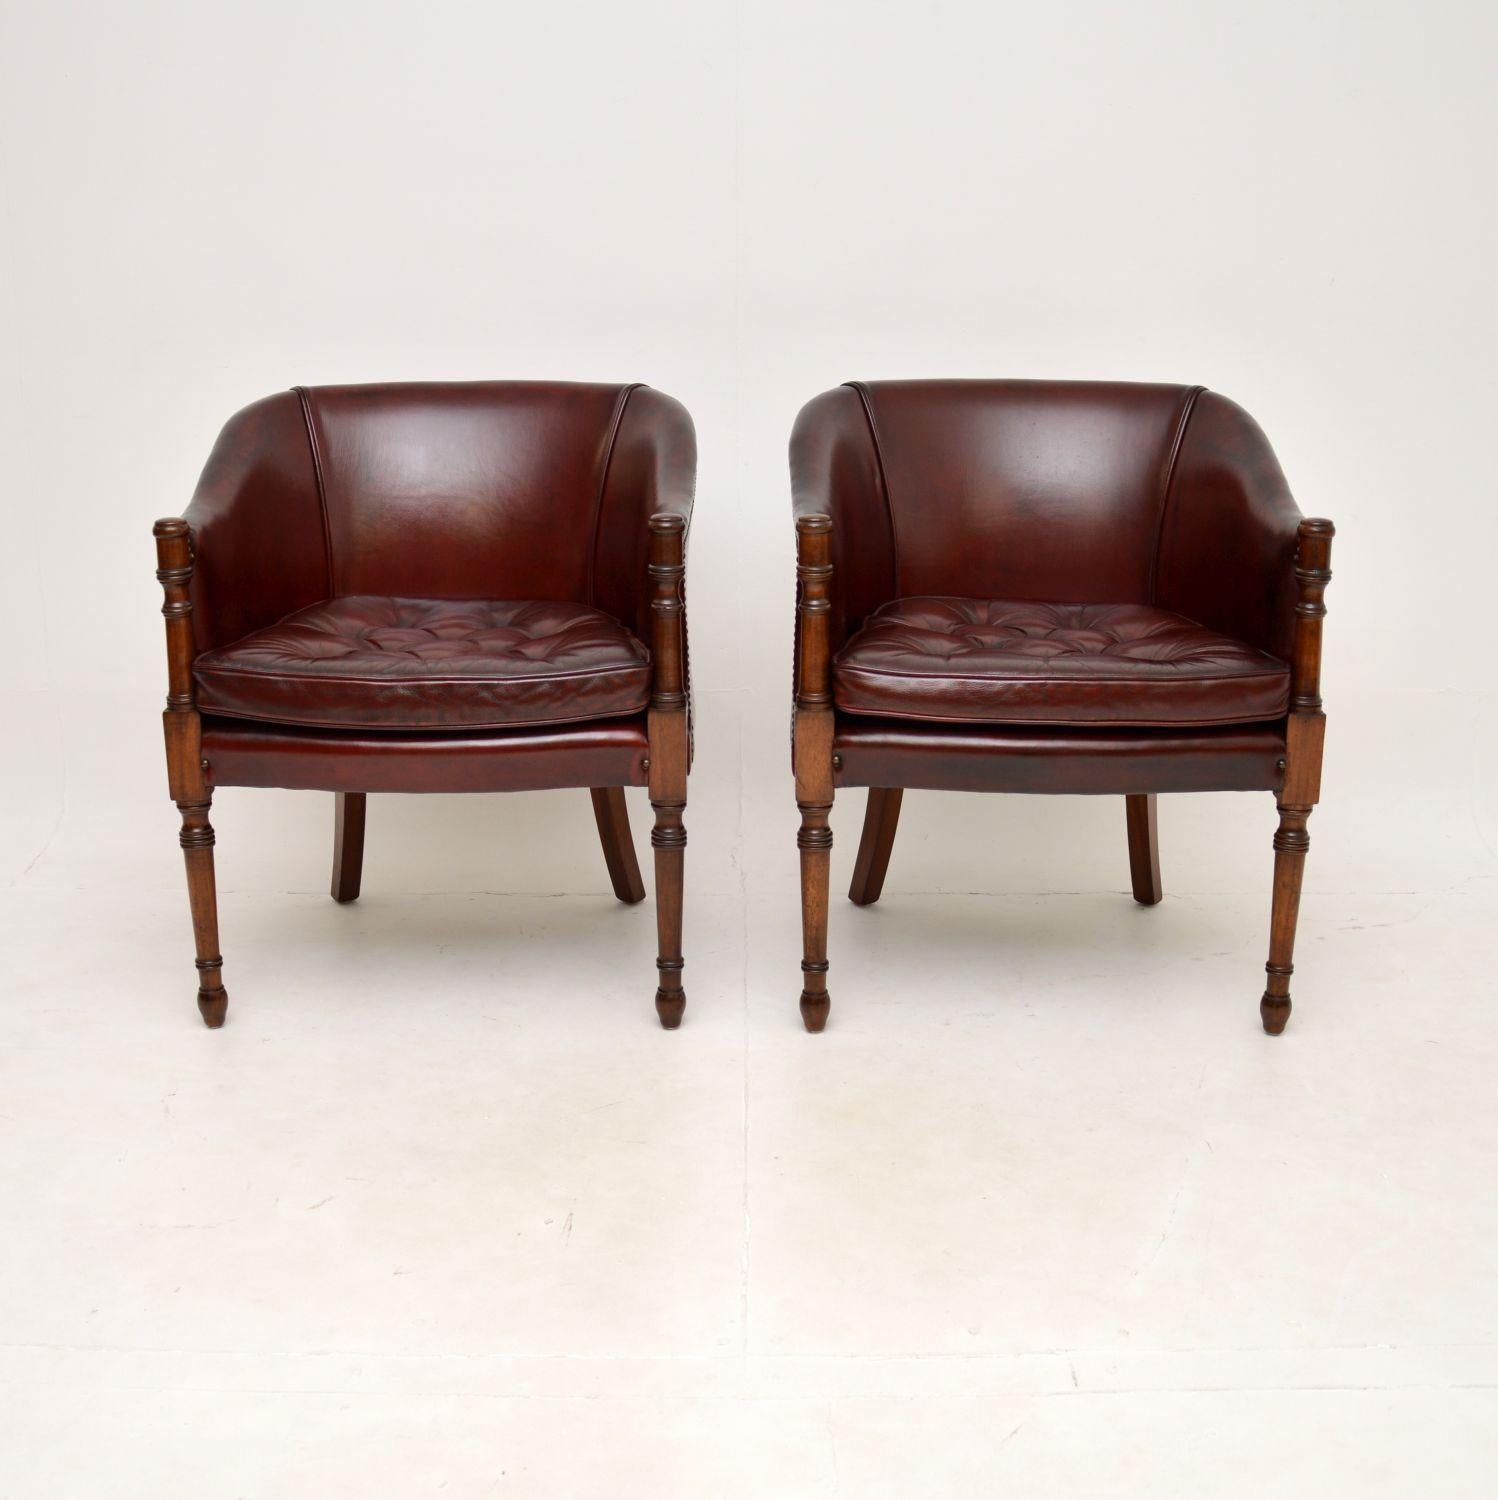 A very smart and extremely well made pair of antique Georgian style leather armchairs. They were made in England, they date from around the 1950’s.

The quality is superb, they are very comfortable and beautifully designed. The burgundy leather has